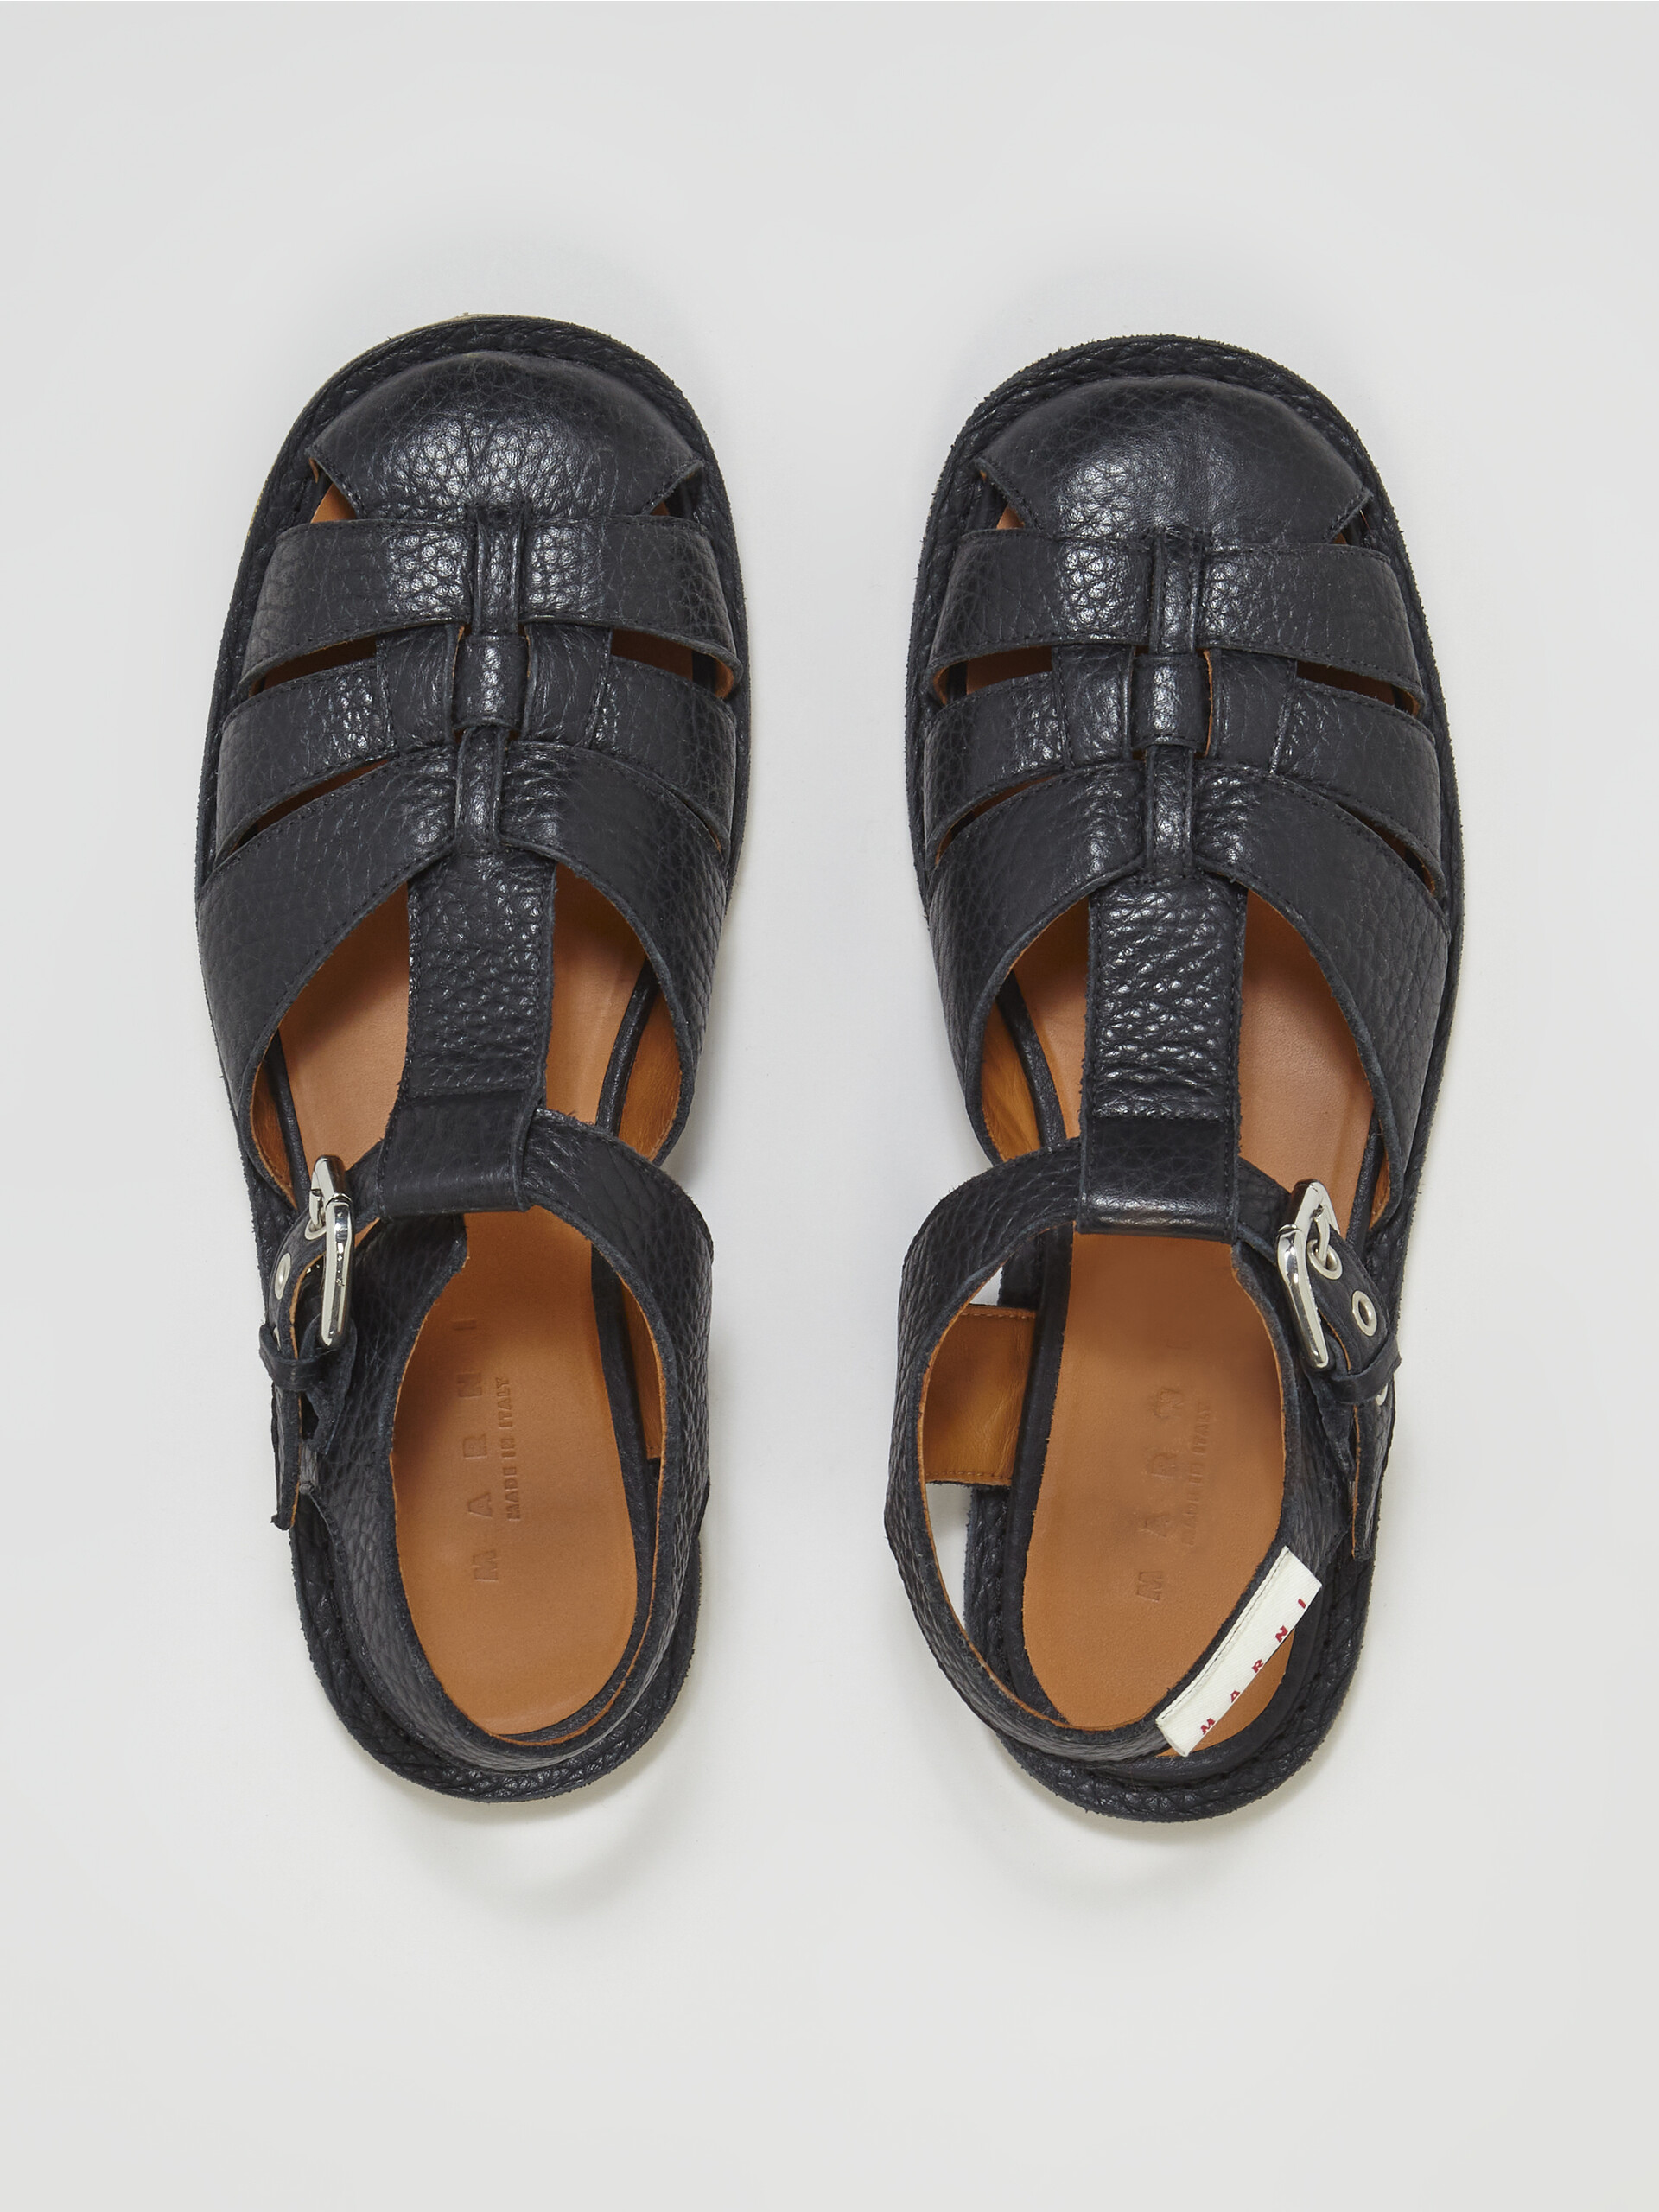 Grained calf leather Fisherman sandal - Sandals - Image 4